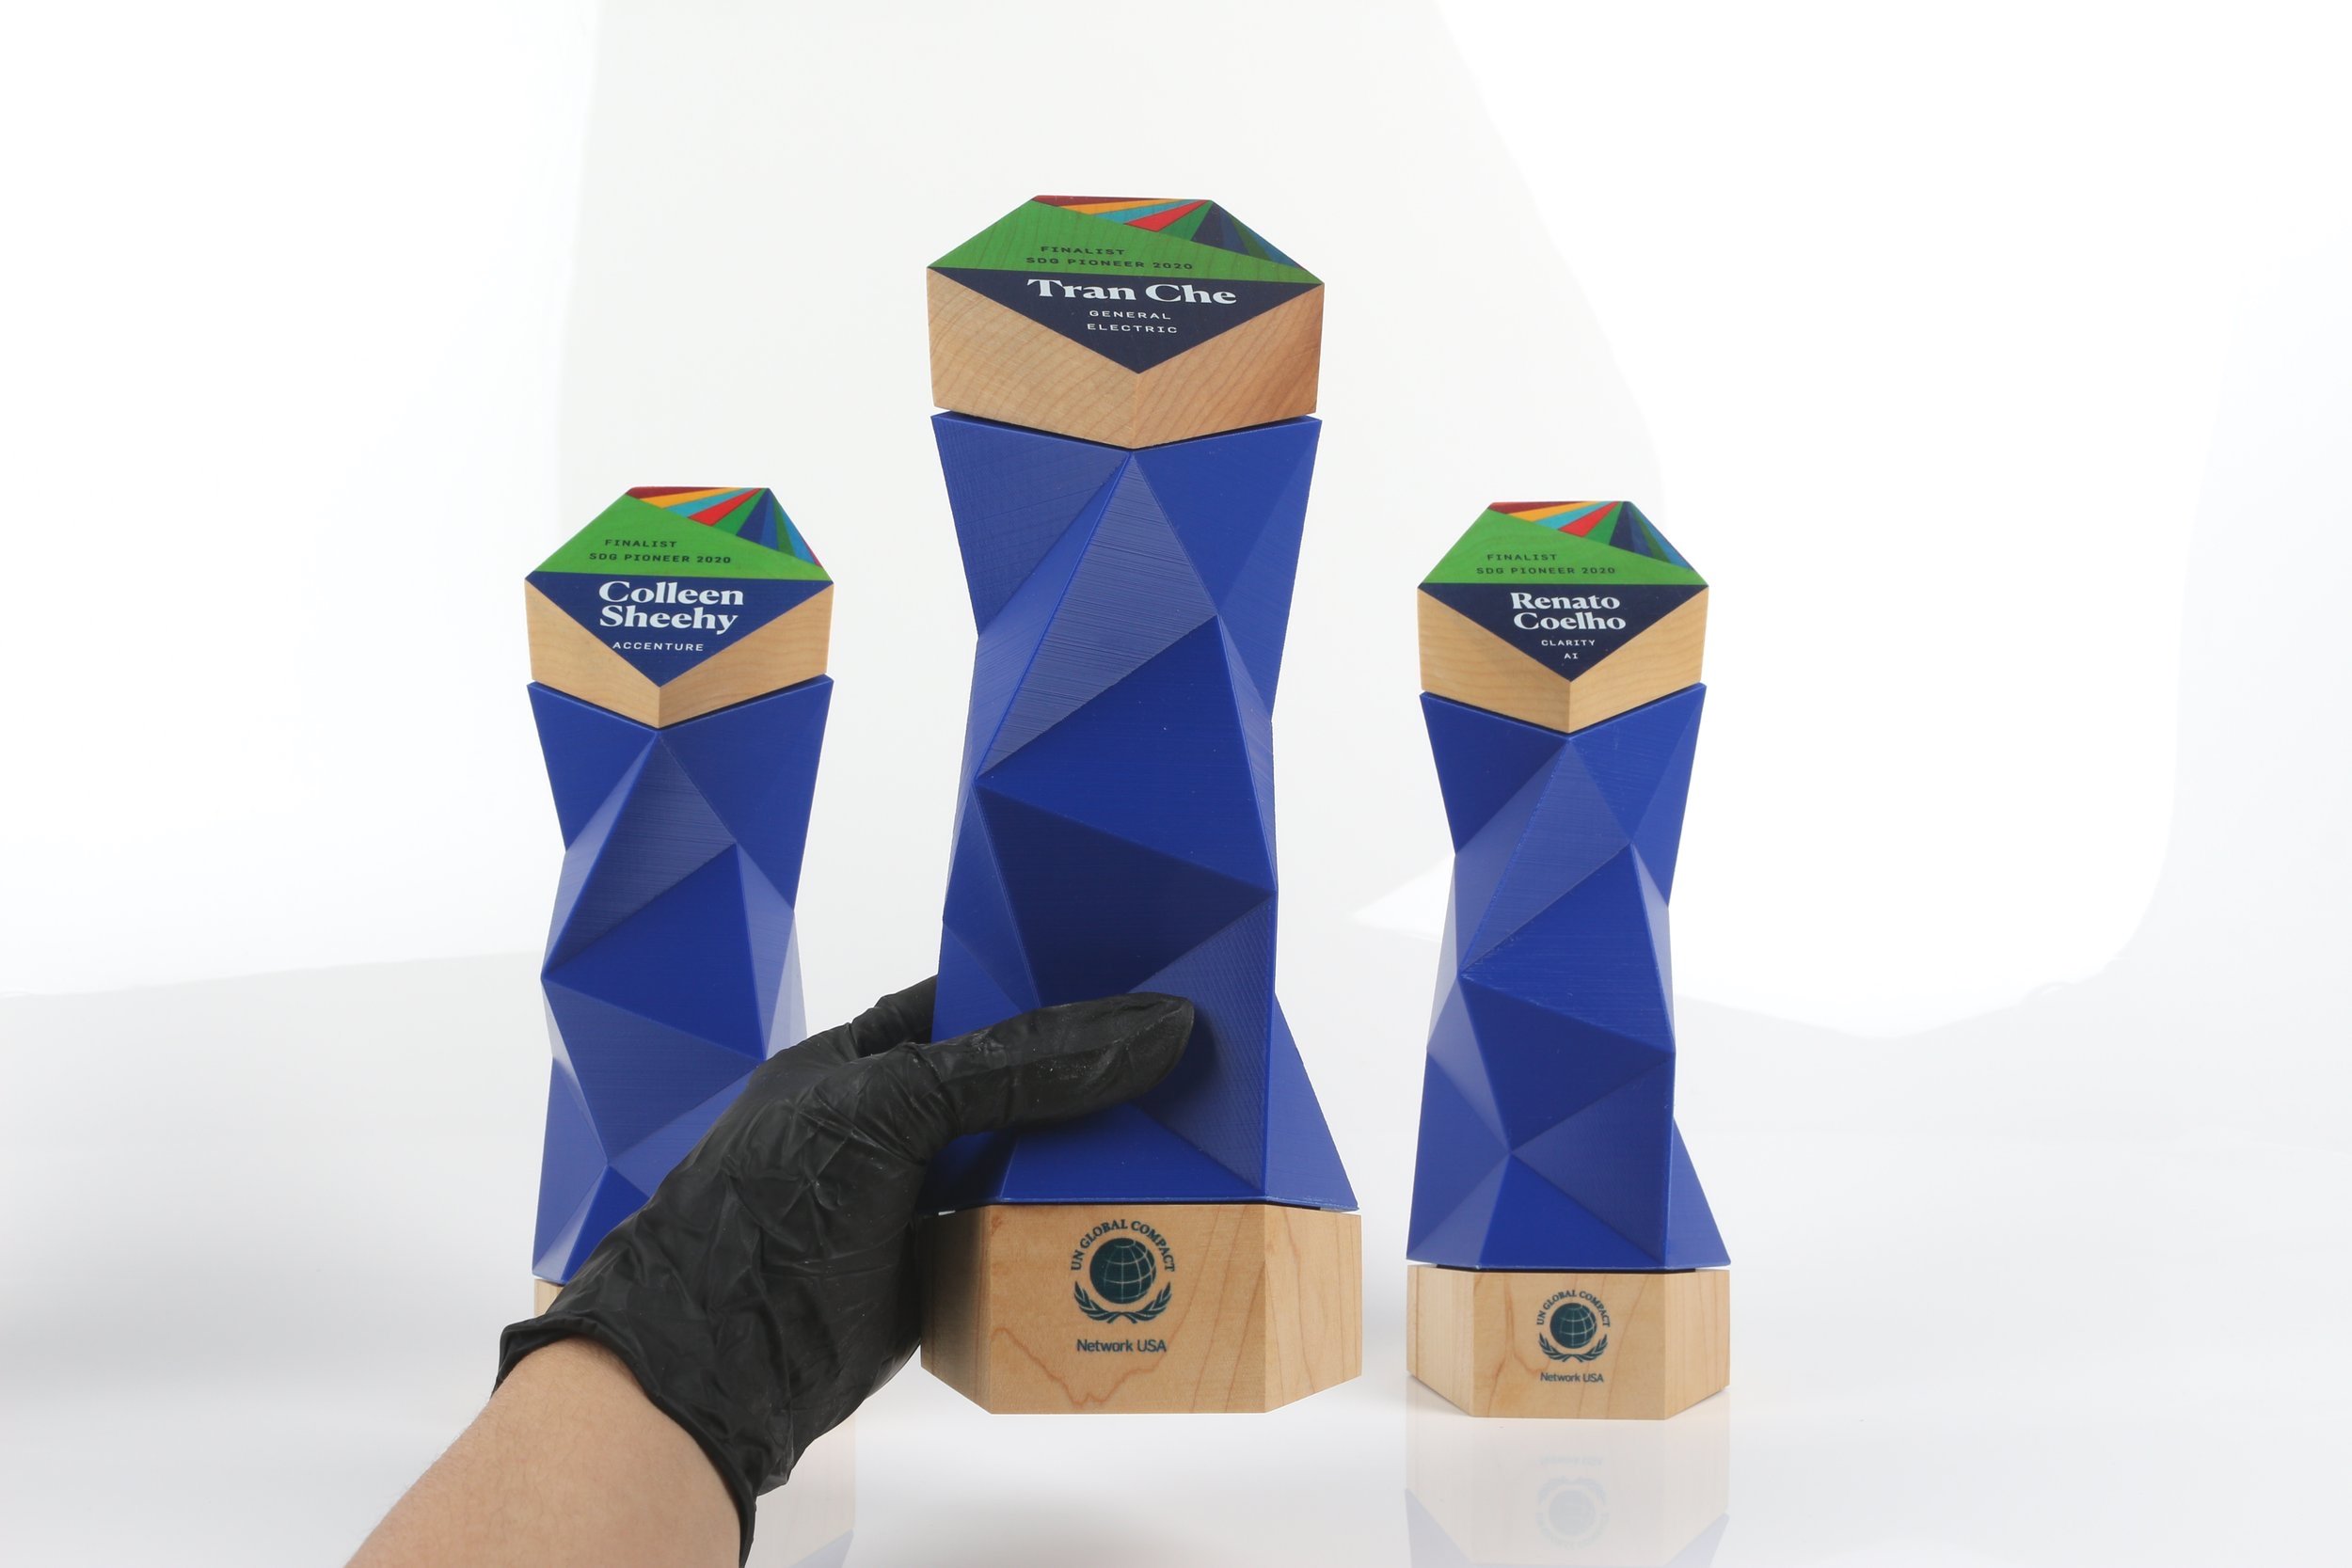 united-nations-global-compact-pioneer-awards-3d-printed-PLA